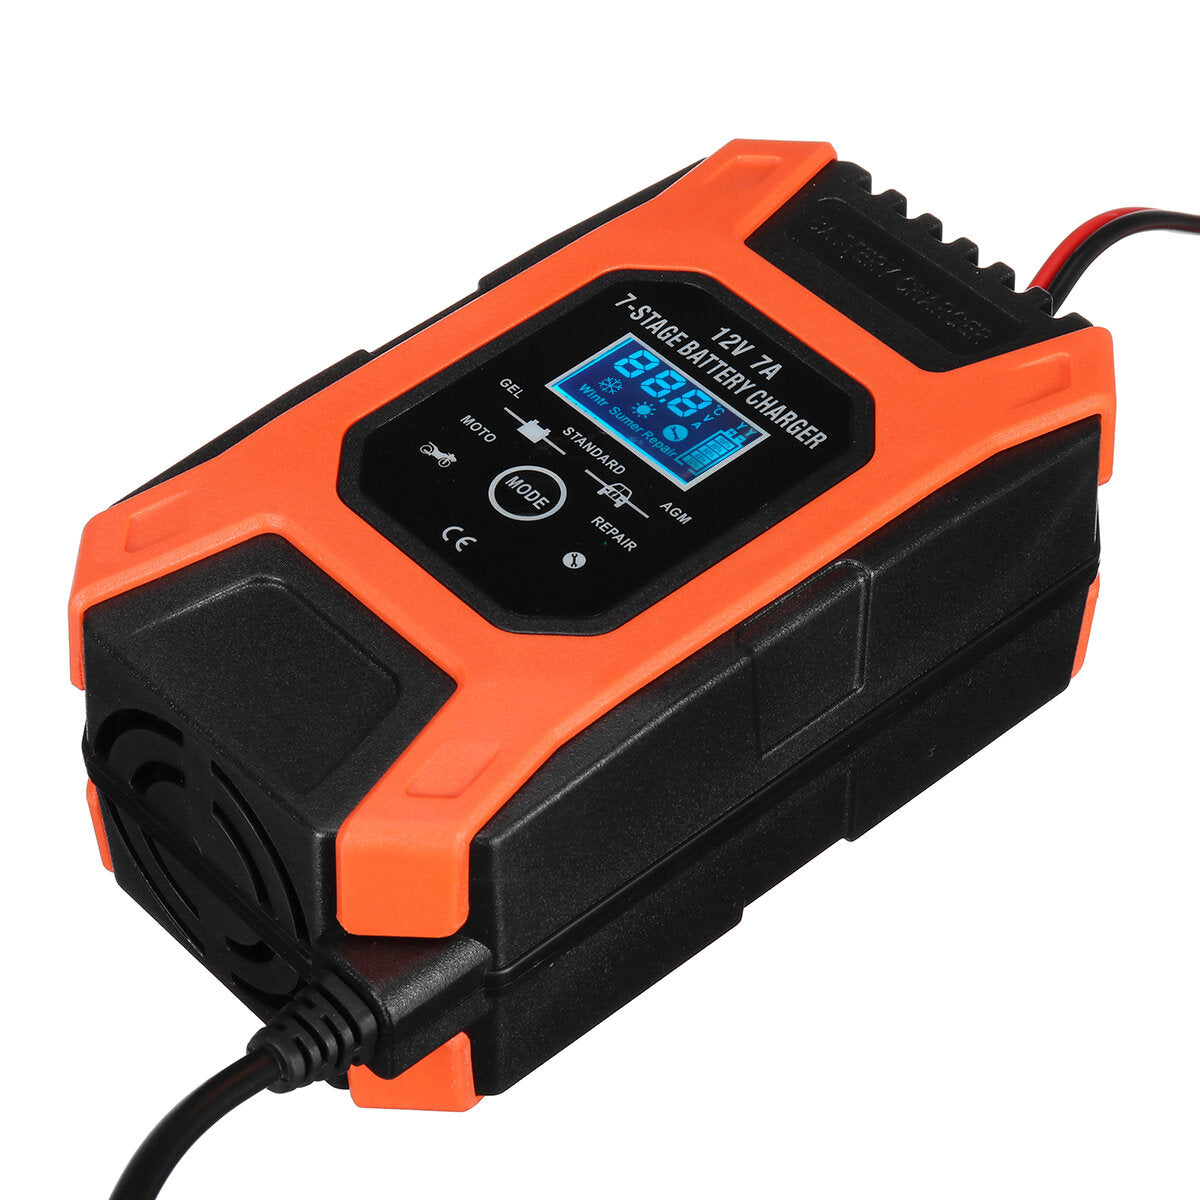 12 v 7a 7-traps lcd pulsreparatie acculader voor auto motor agm gel nat loodzuur